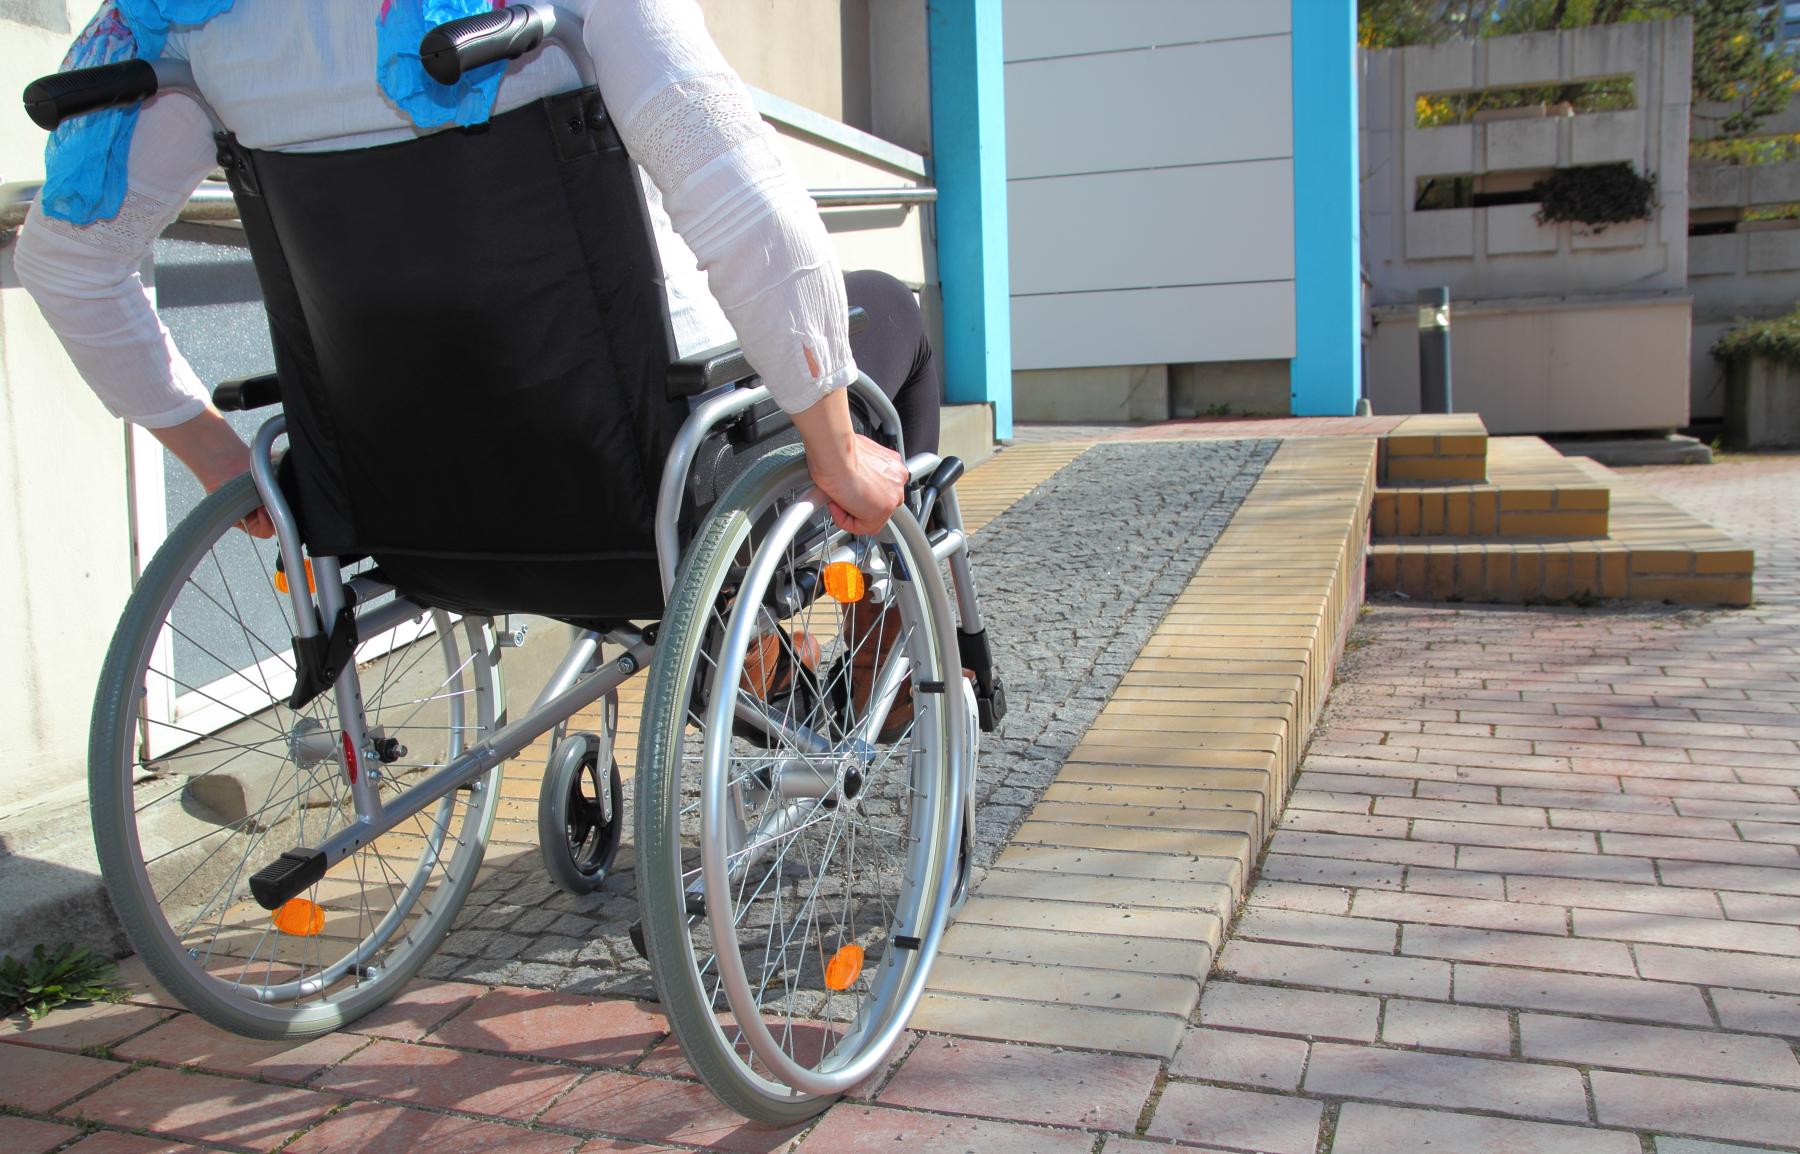 Picture shows the back of a wheelchair user wheeling up ramp and into building